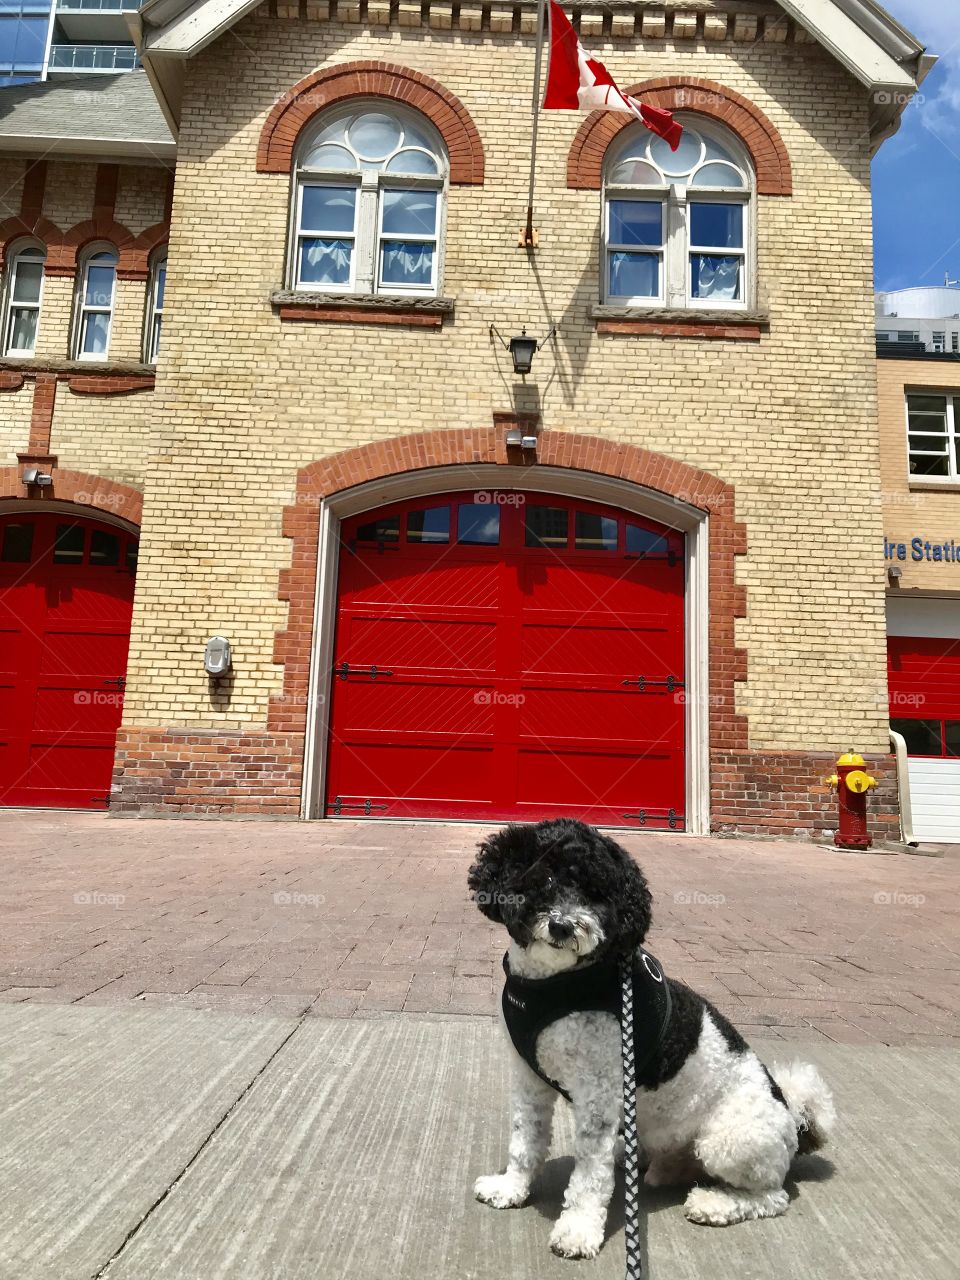 Fire station 